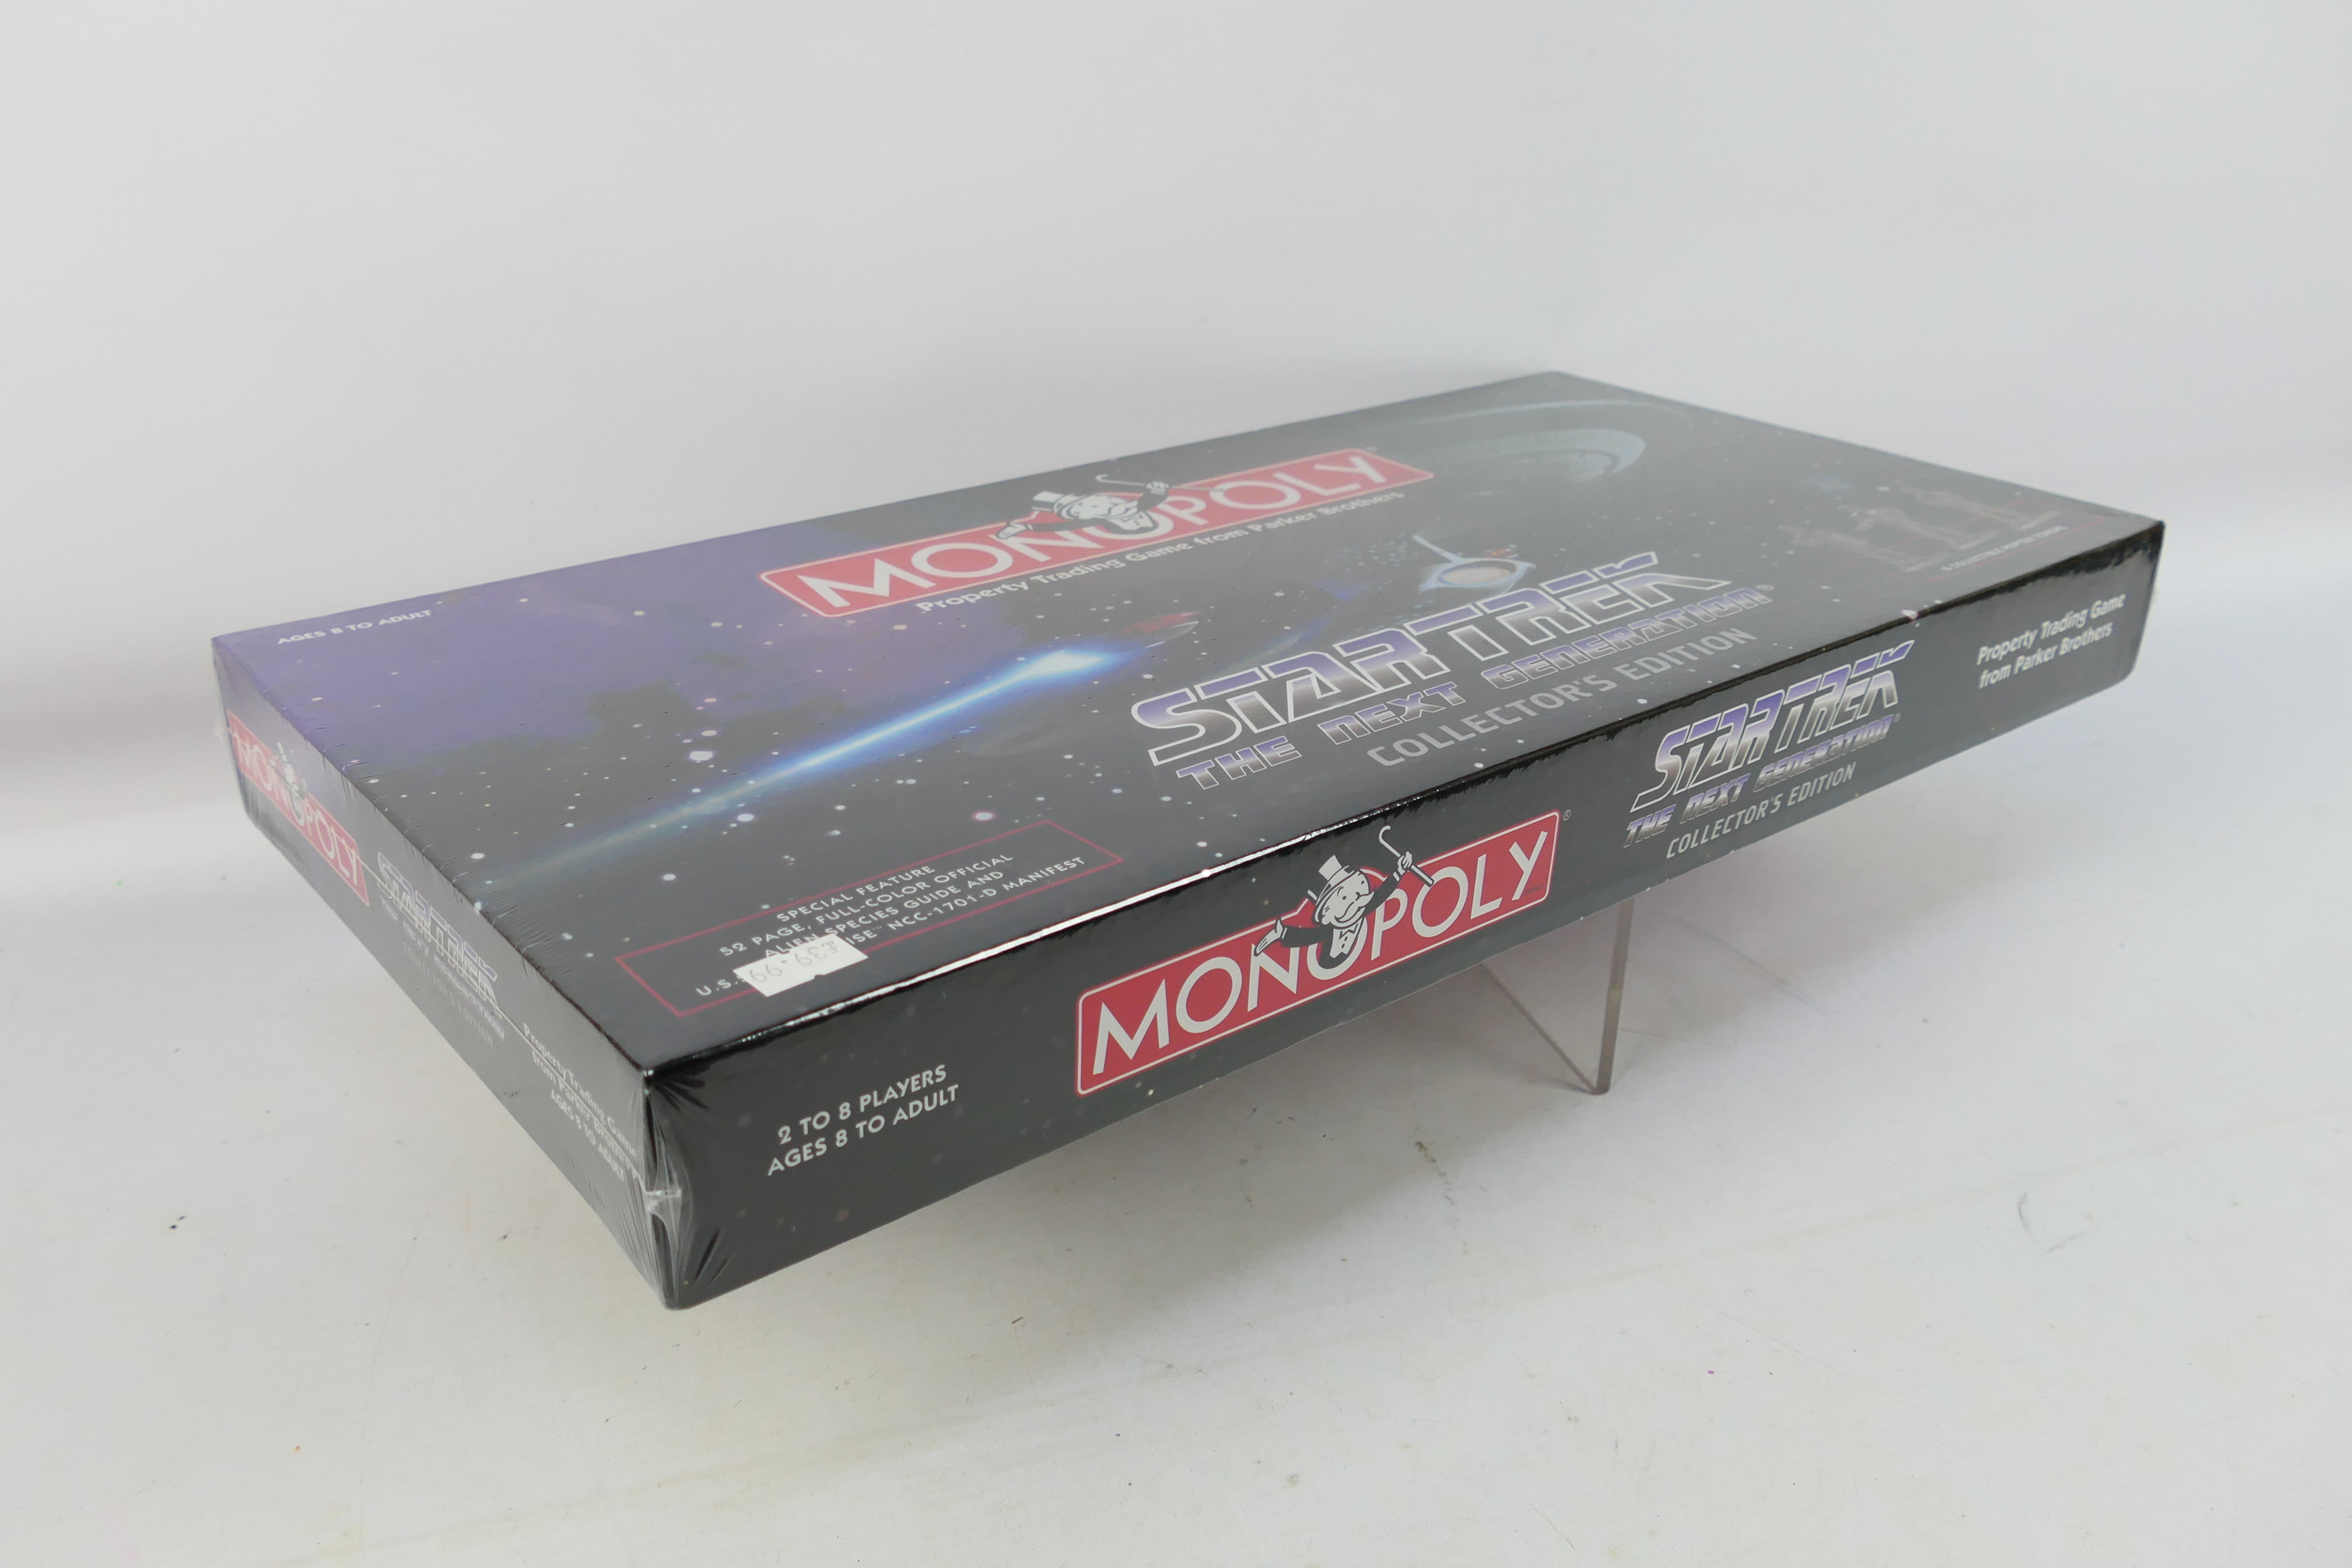 Hasbro - Monopoly - An unopened Star Tre - Image 3 of 3